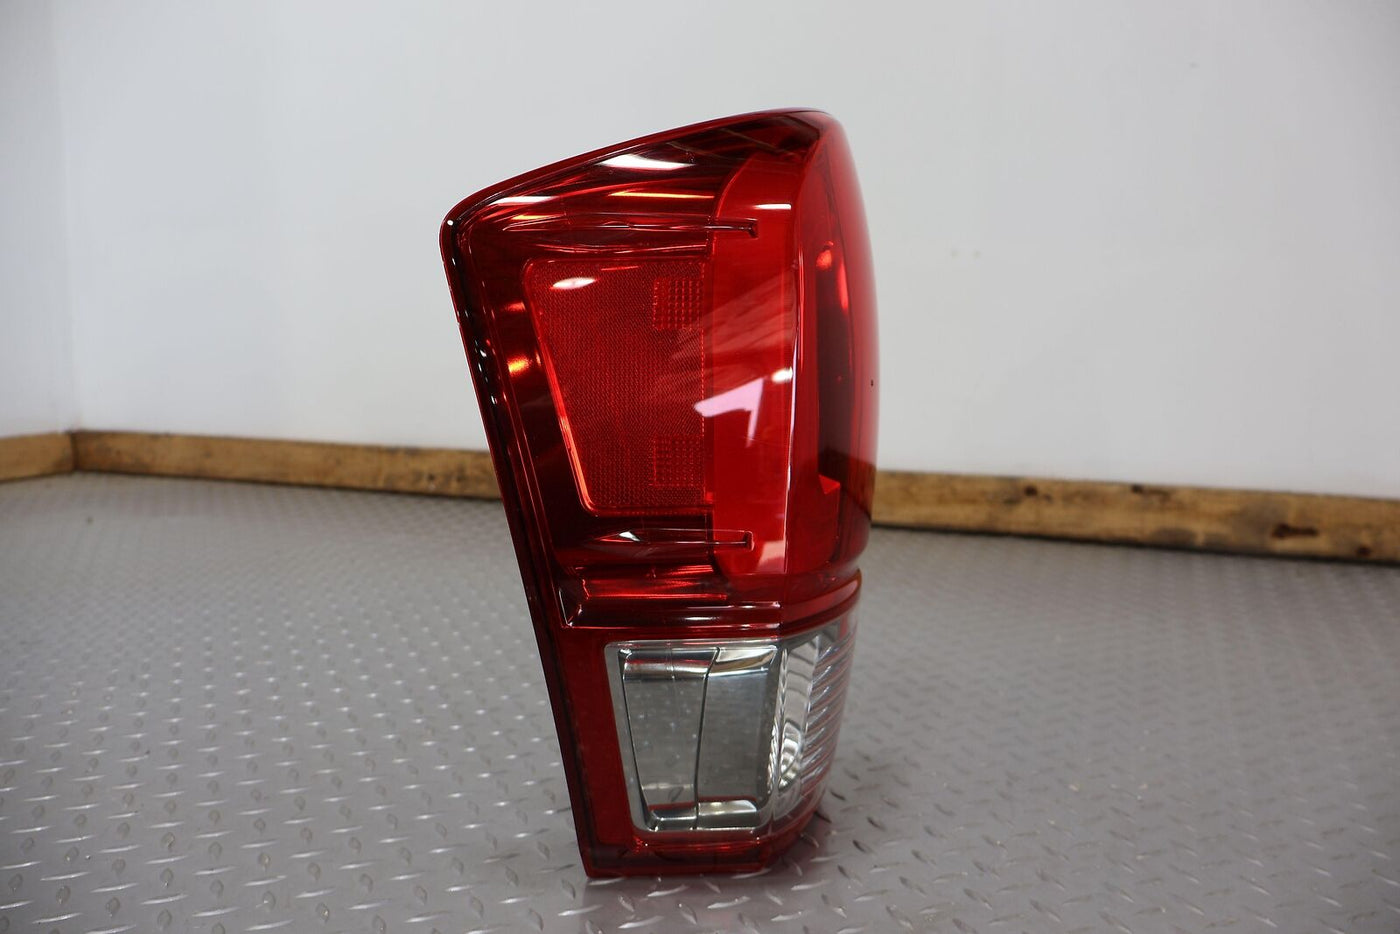 16-22 Toyota Tacoma TRD OEM Left LH Driver Tail Light (Tested) Red Lens